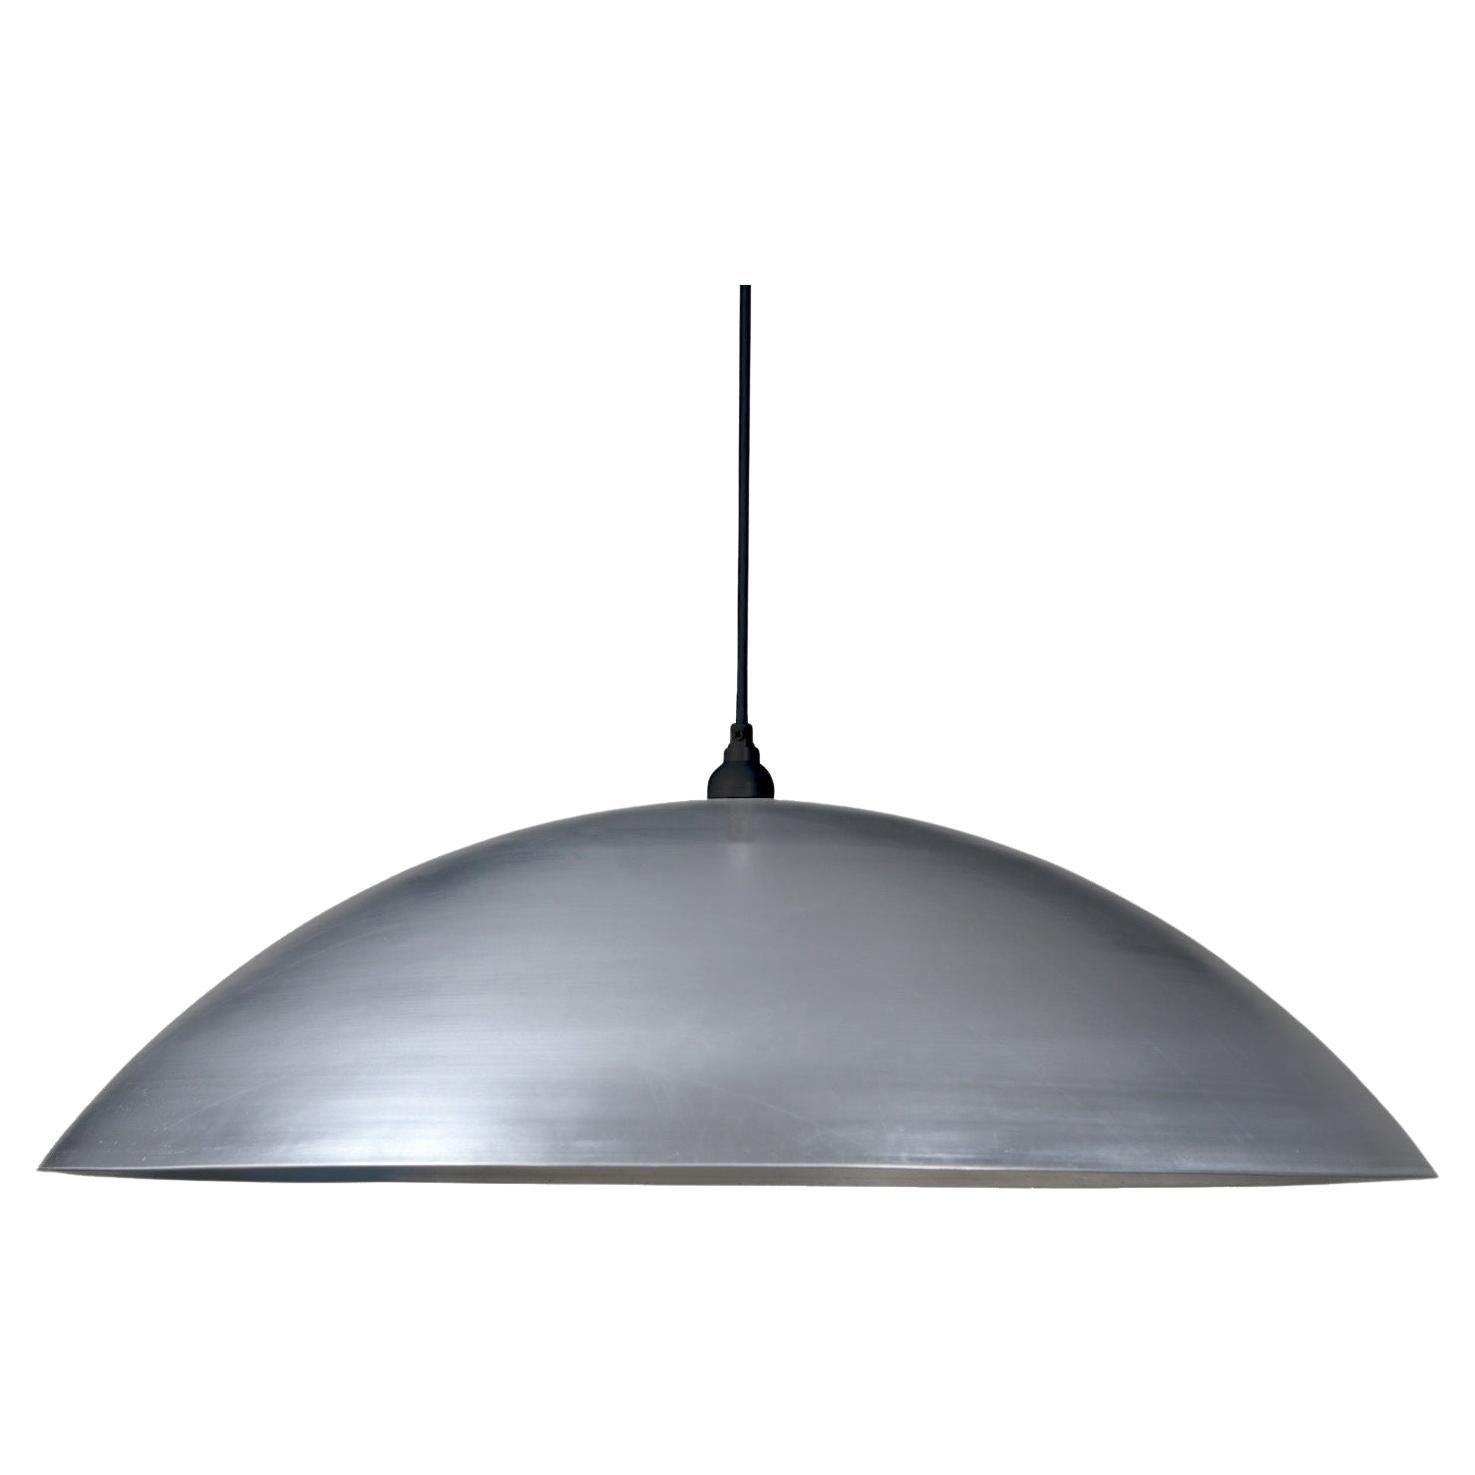 Customizable Oversized Pendant by RESEARCH Lighting, Waxed Aluminum, In Stock